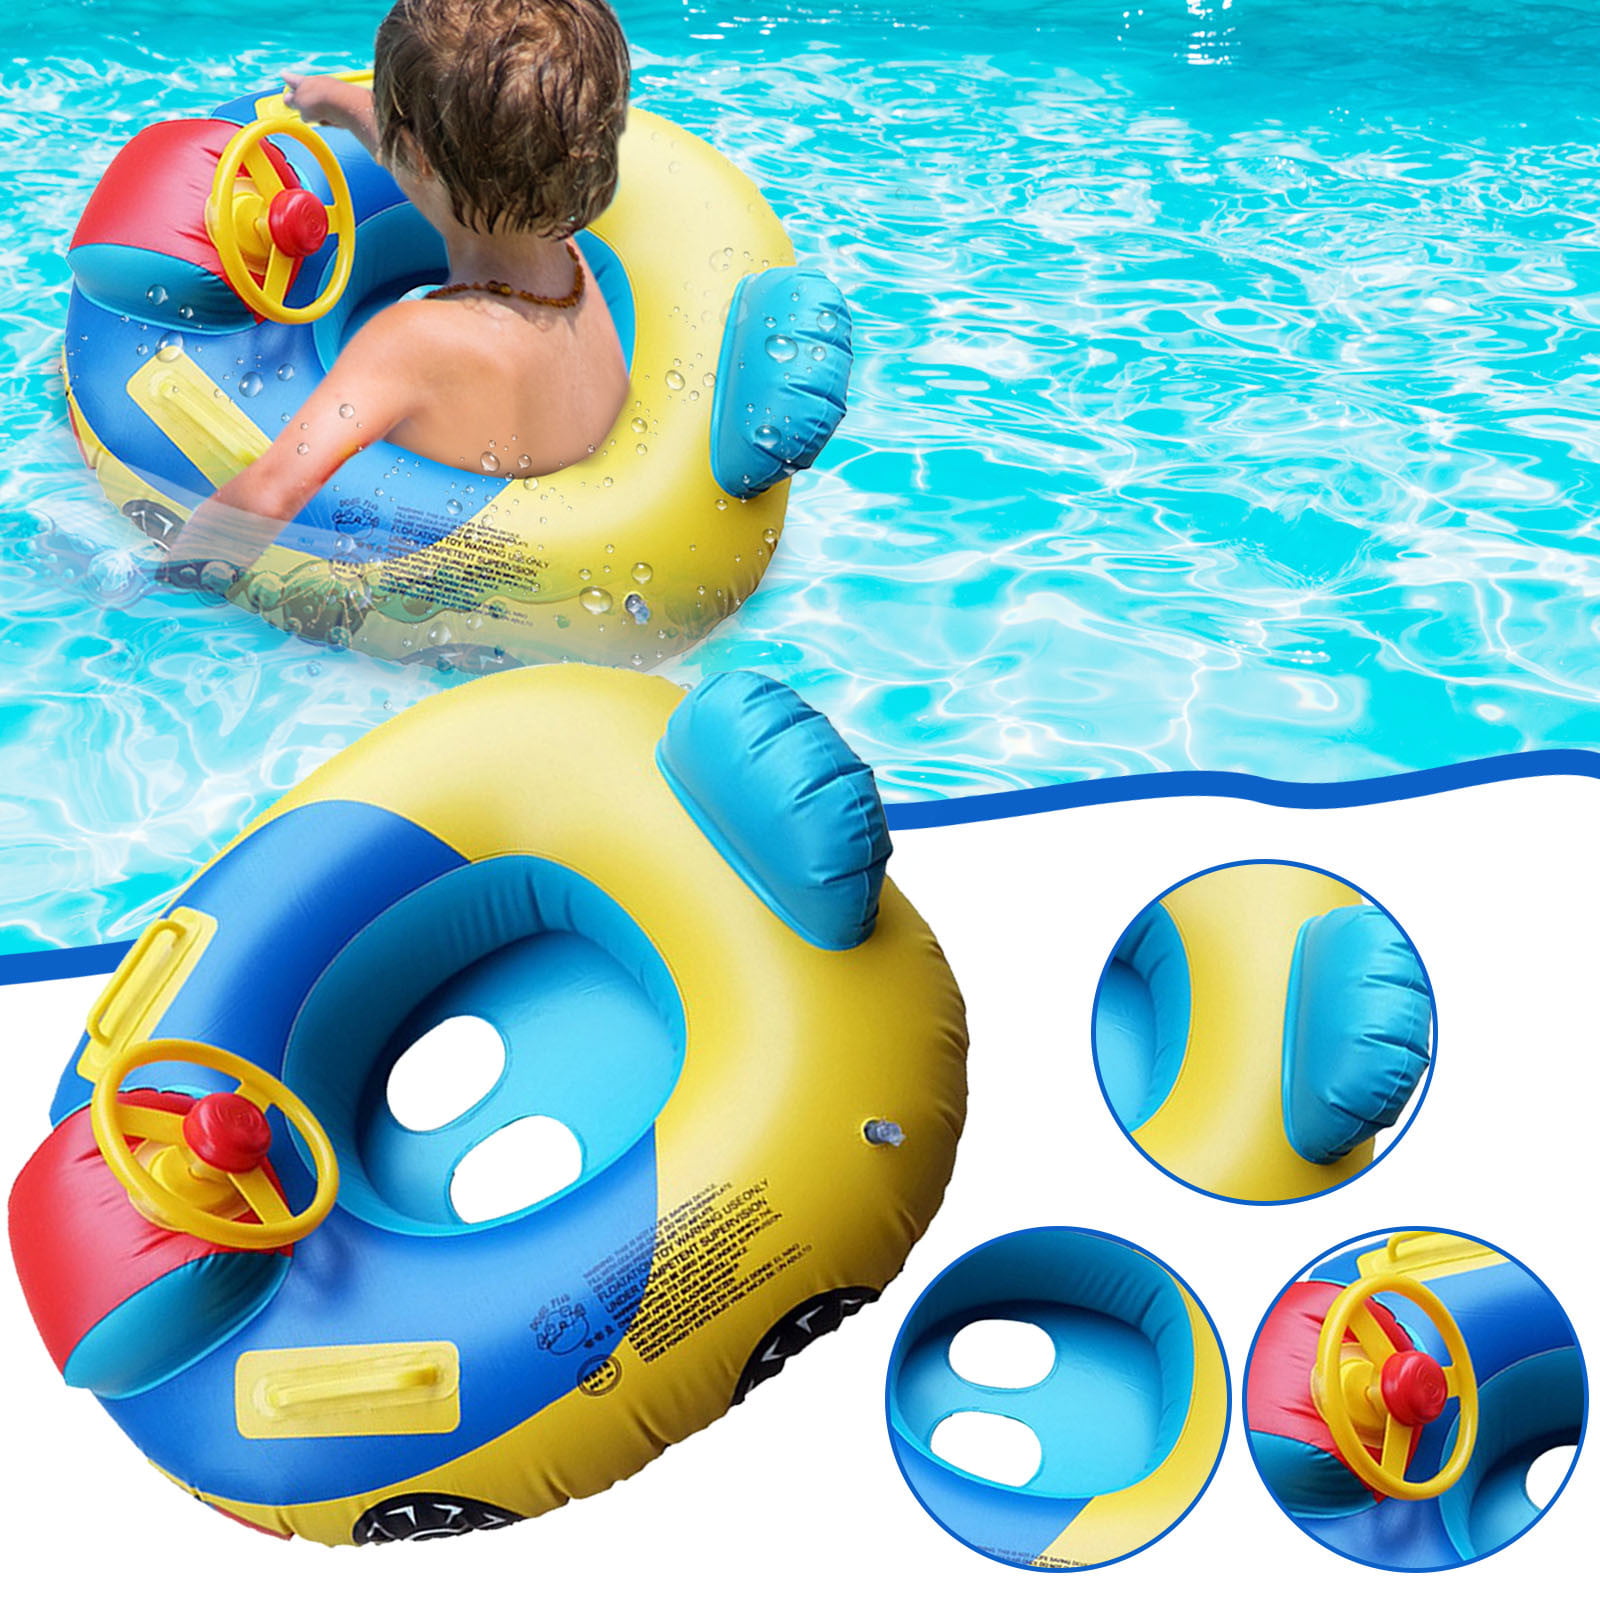 FLOAT, TUBE, BALL Turtle & Octopus Details about   Play Day Water Toy Child Swim Set 